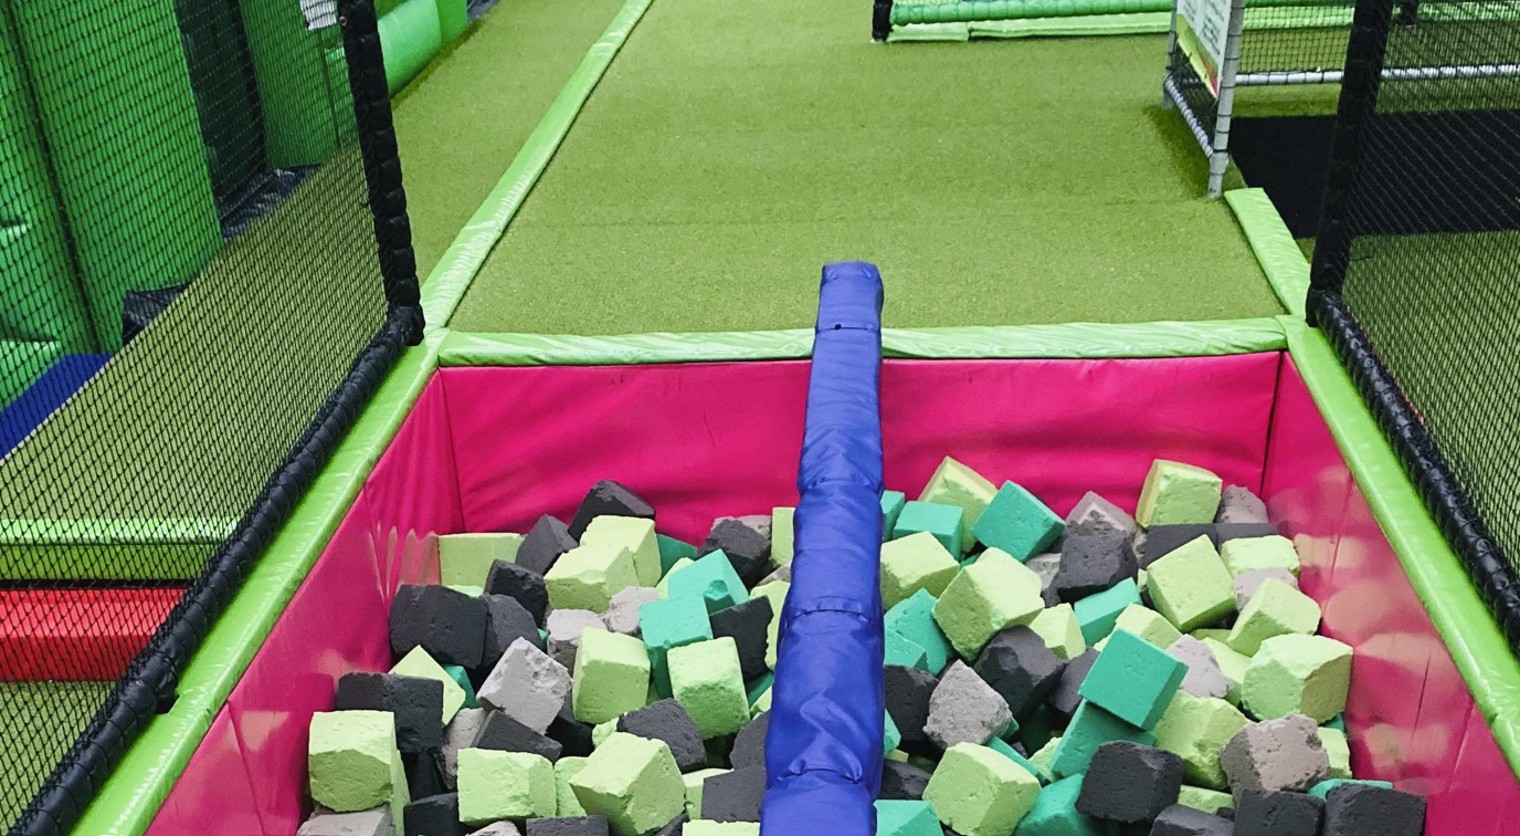 Balance beam over foam pit at Flip Out UK